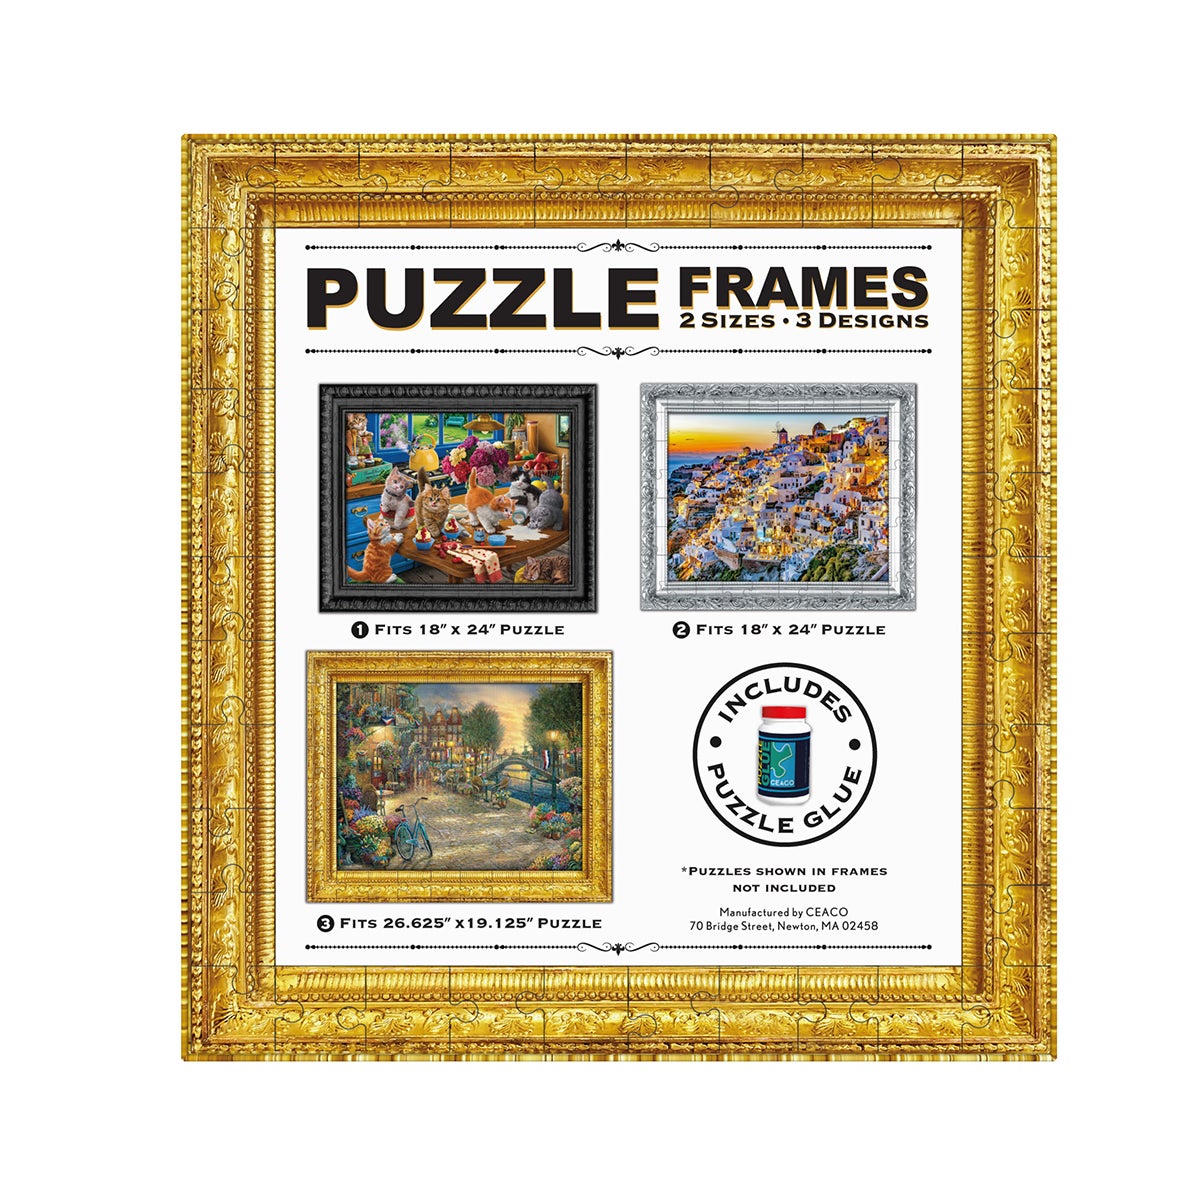 PUZZLE FRAME (4) ENG